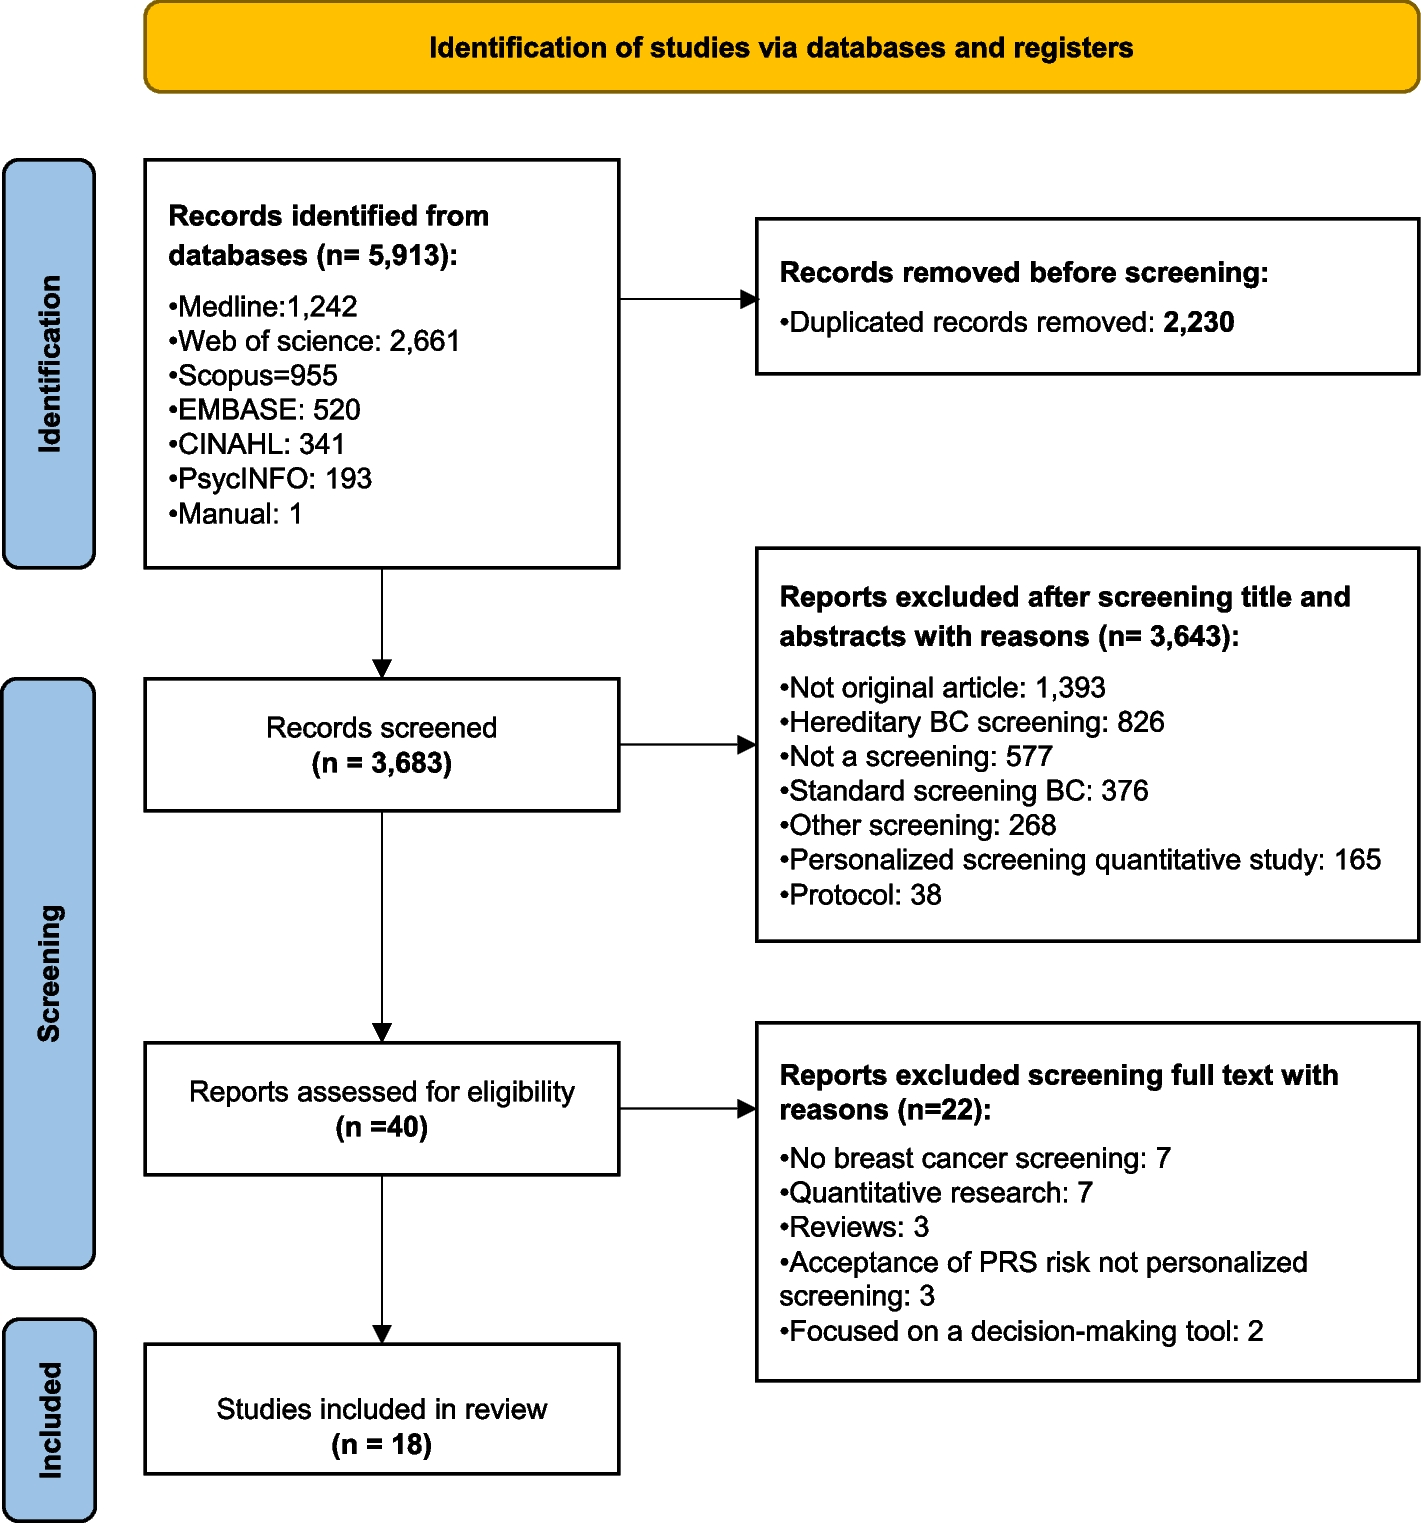 “For and against” factors influencing participation in personalized breast cancer screening programs: a qualitative systematic review until March 2022